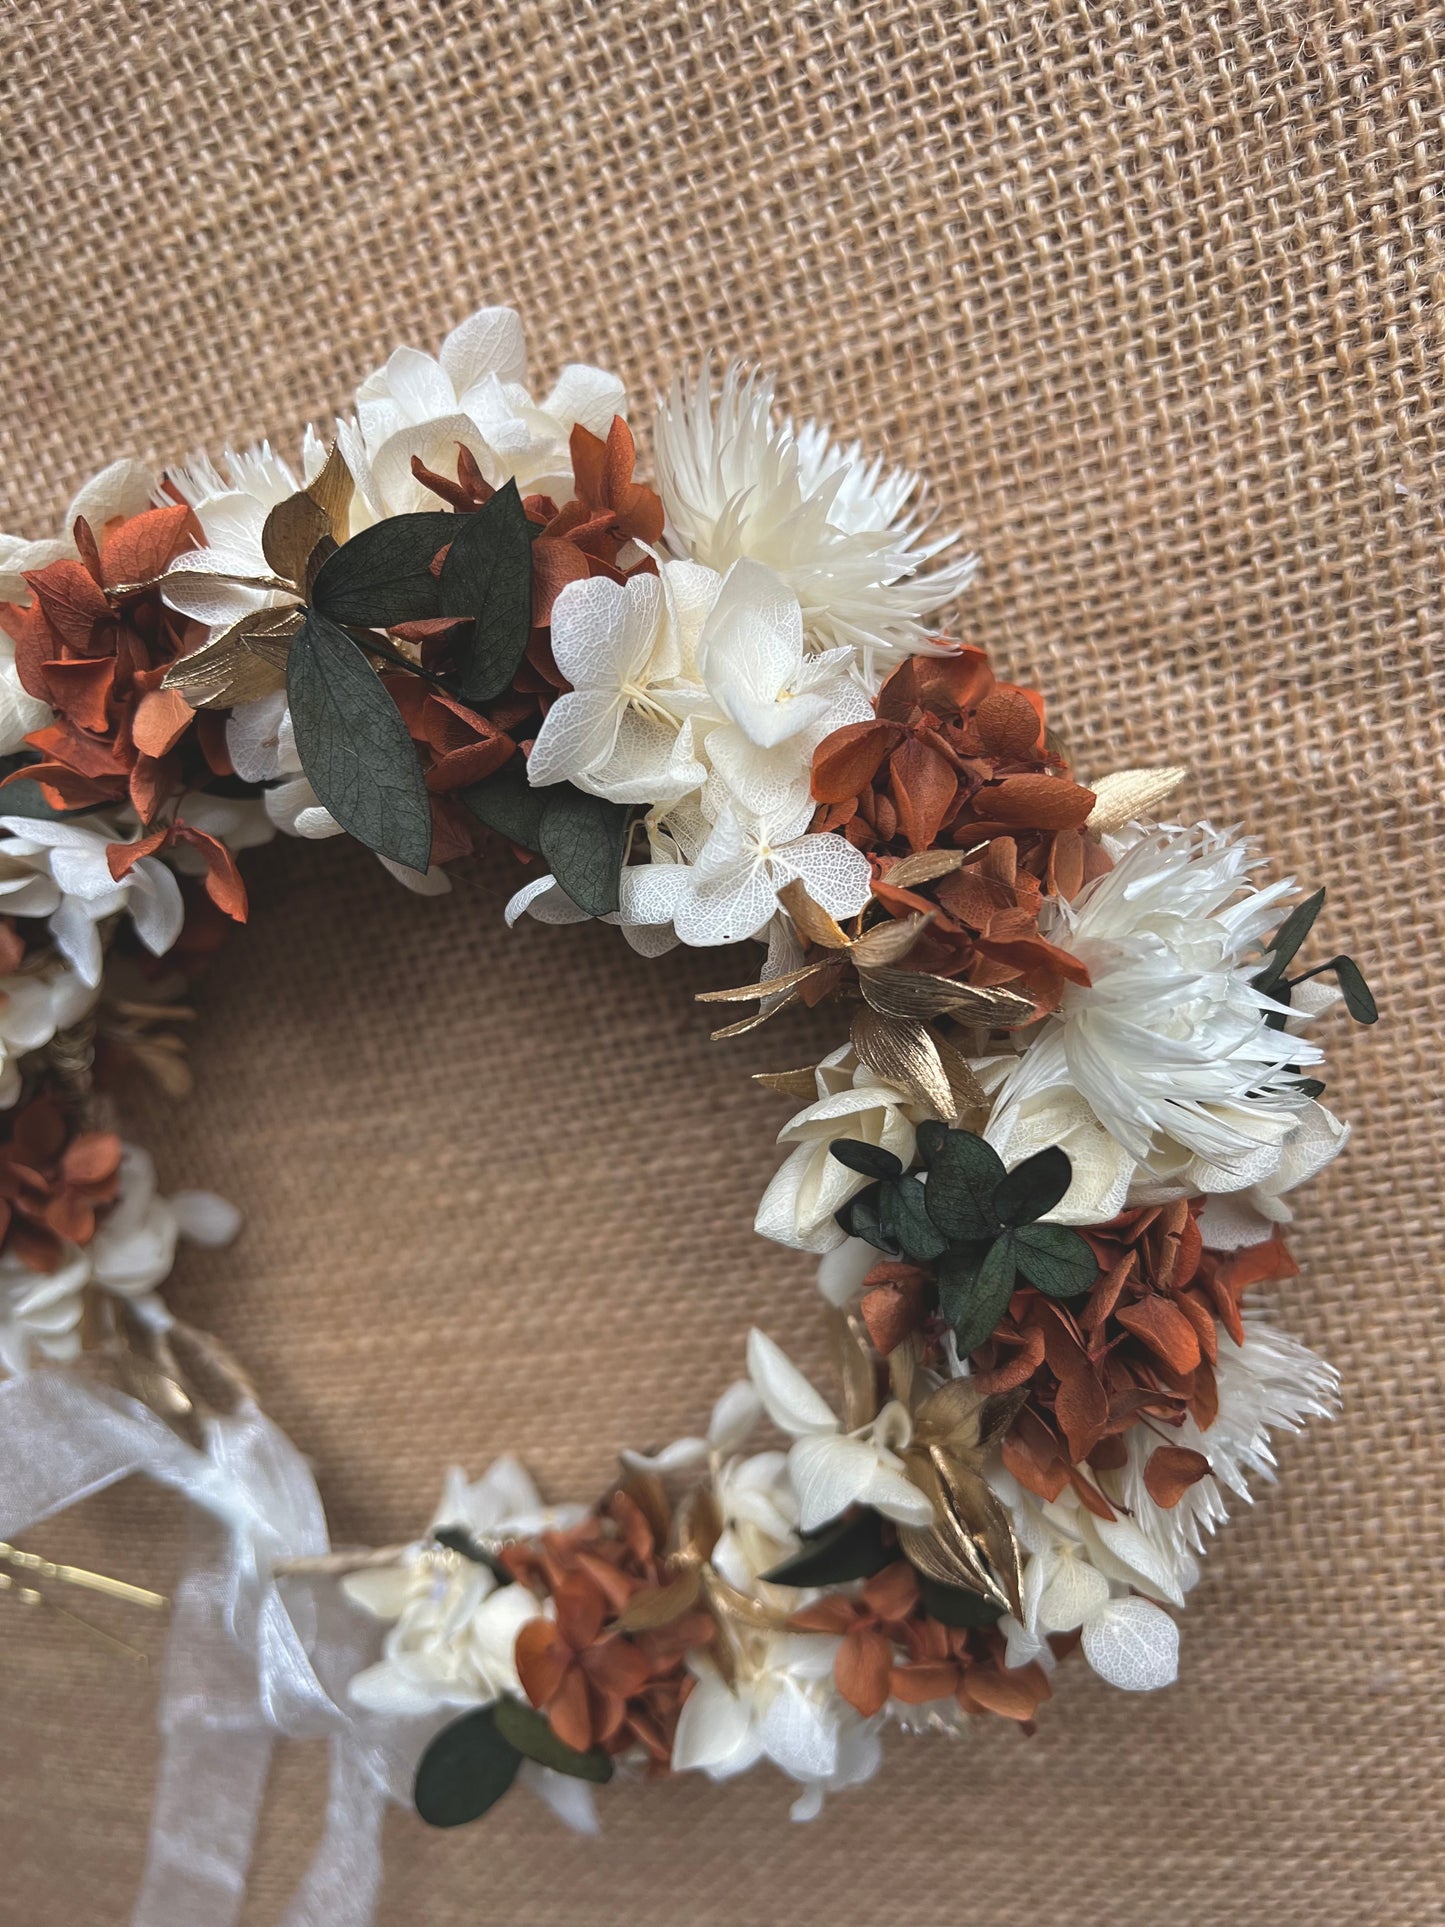 Autumnal Boho Dried Flower Crown Burnt Orange Terracotta Gold Ivory Bridal Floral Headband, Rustic Floral Hair Accessories Set Floral Comb